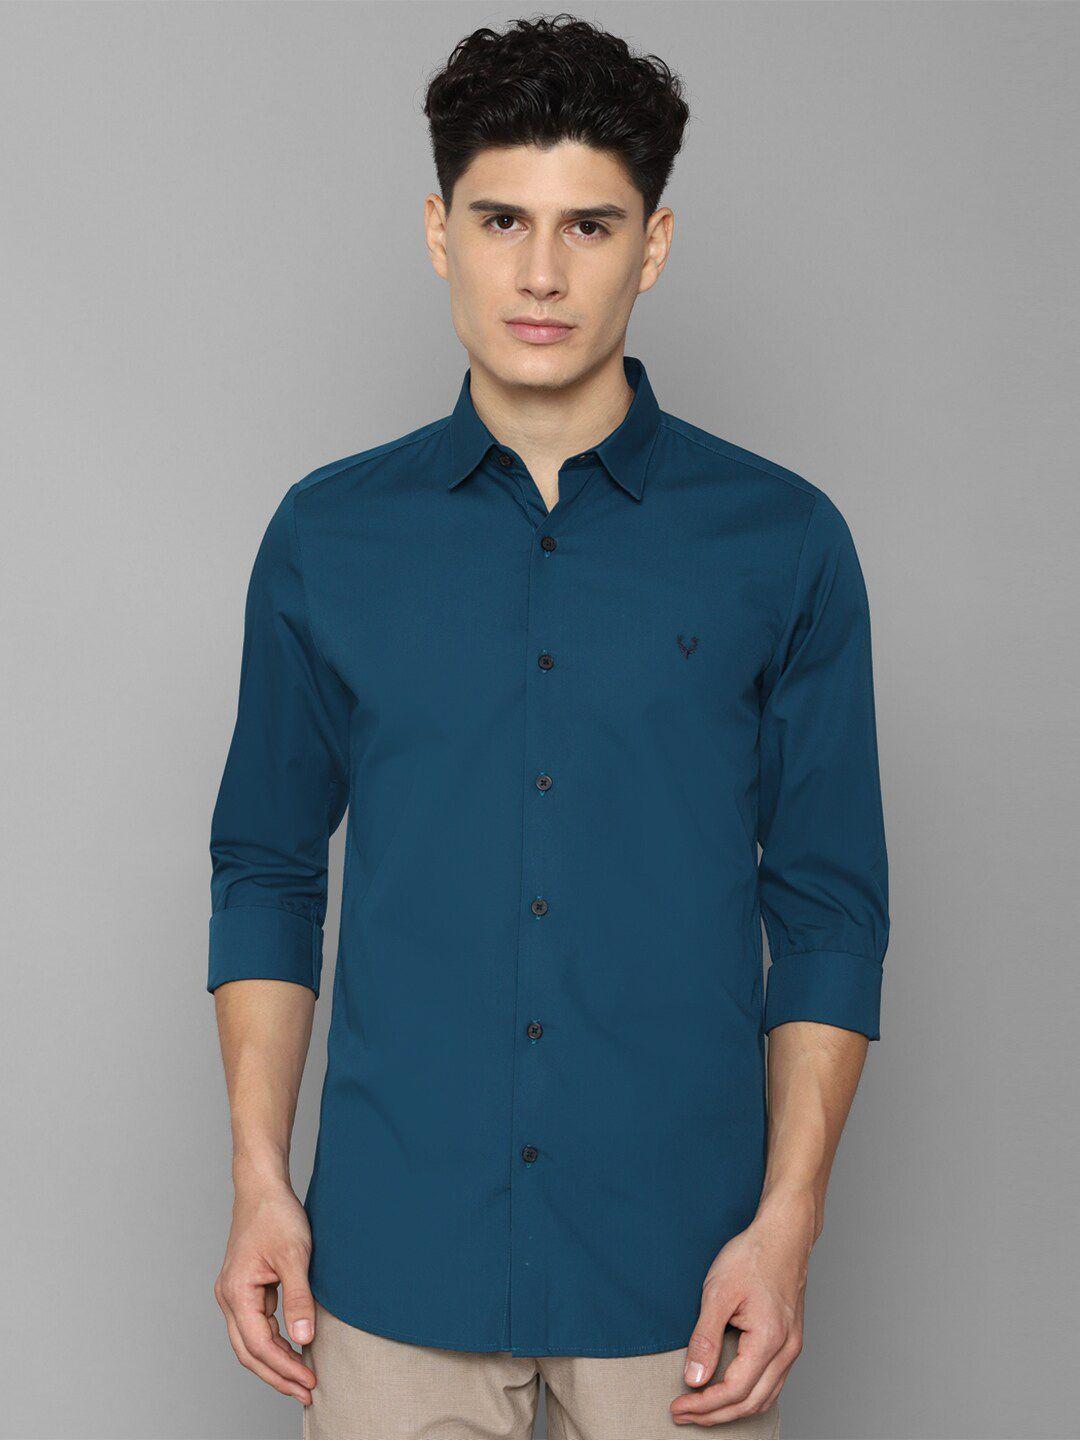 allen solly men teal solid pure cotton slim fit casual shirt